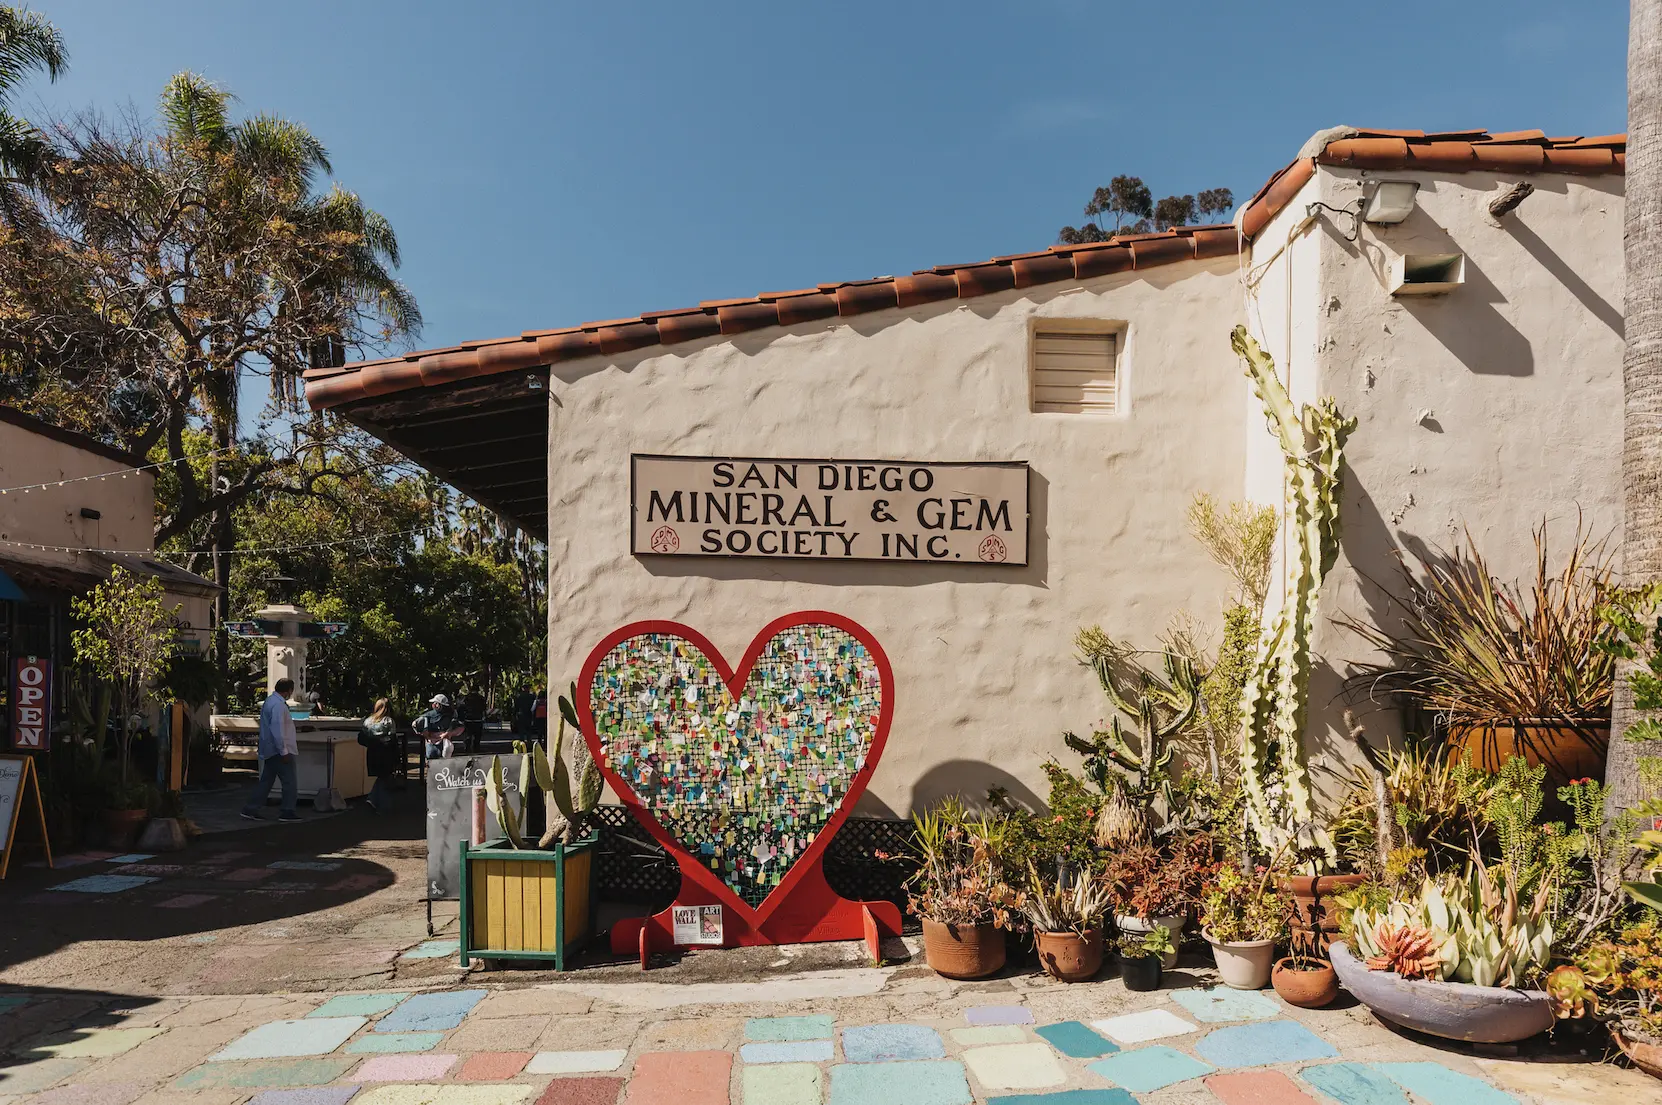 San Diego Mineral and Gem Society building. The building is off white with a red terracotta roof.